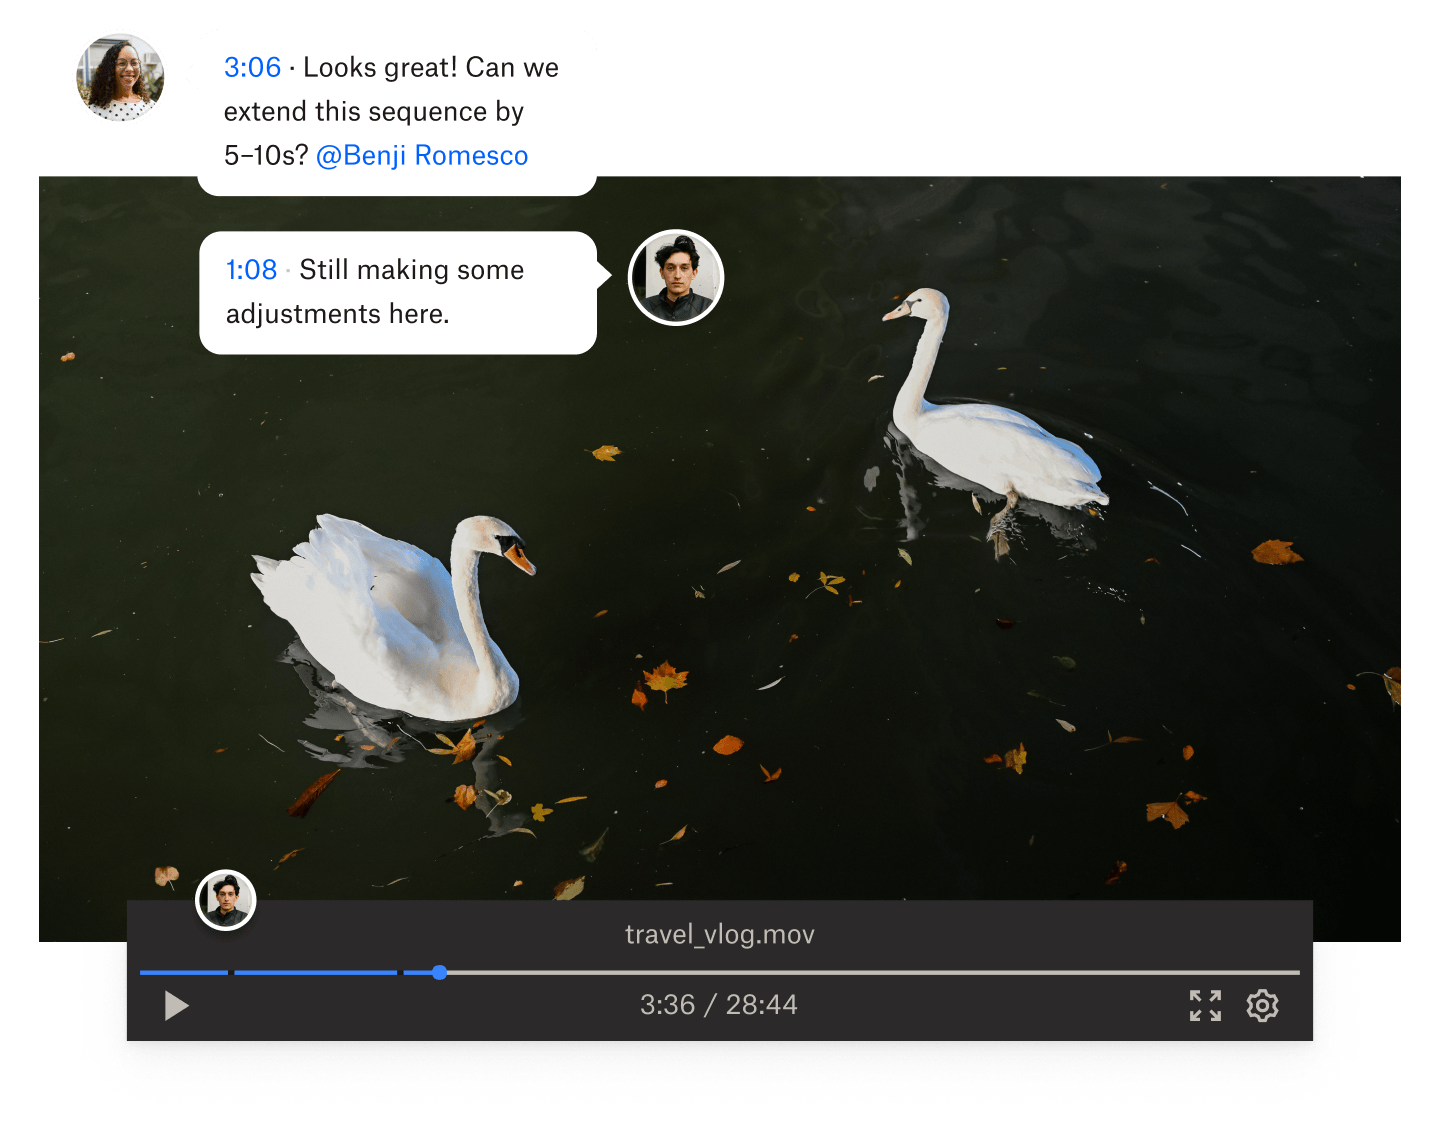 Two people leave a time-based comment on a Dropbox video file of two swans swimming.